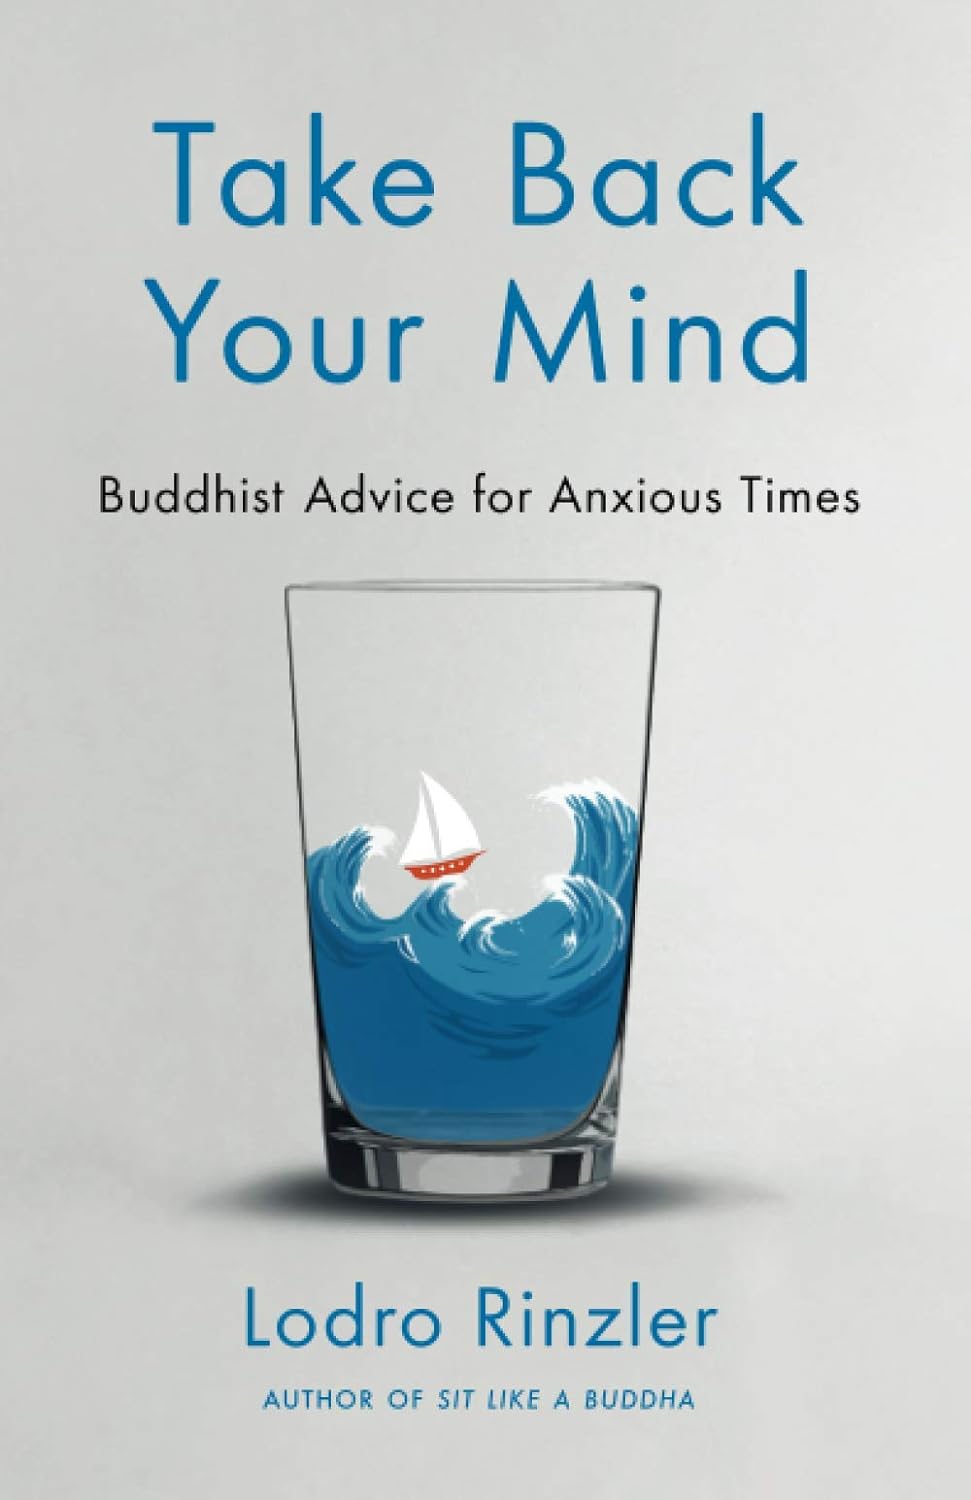 Take Back Your Mind: Buddhist Advice for Anxious Times - Lodro Rinzler